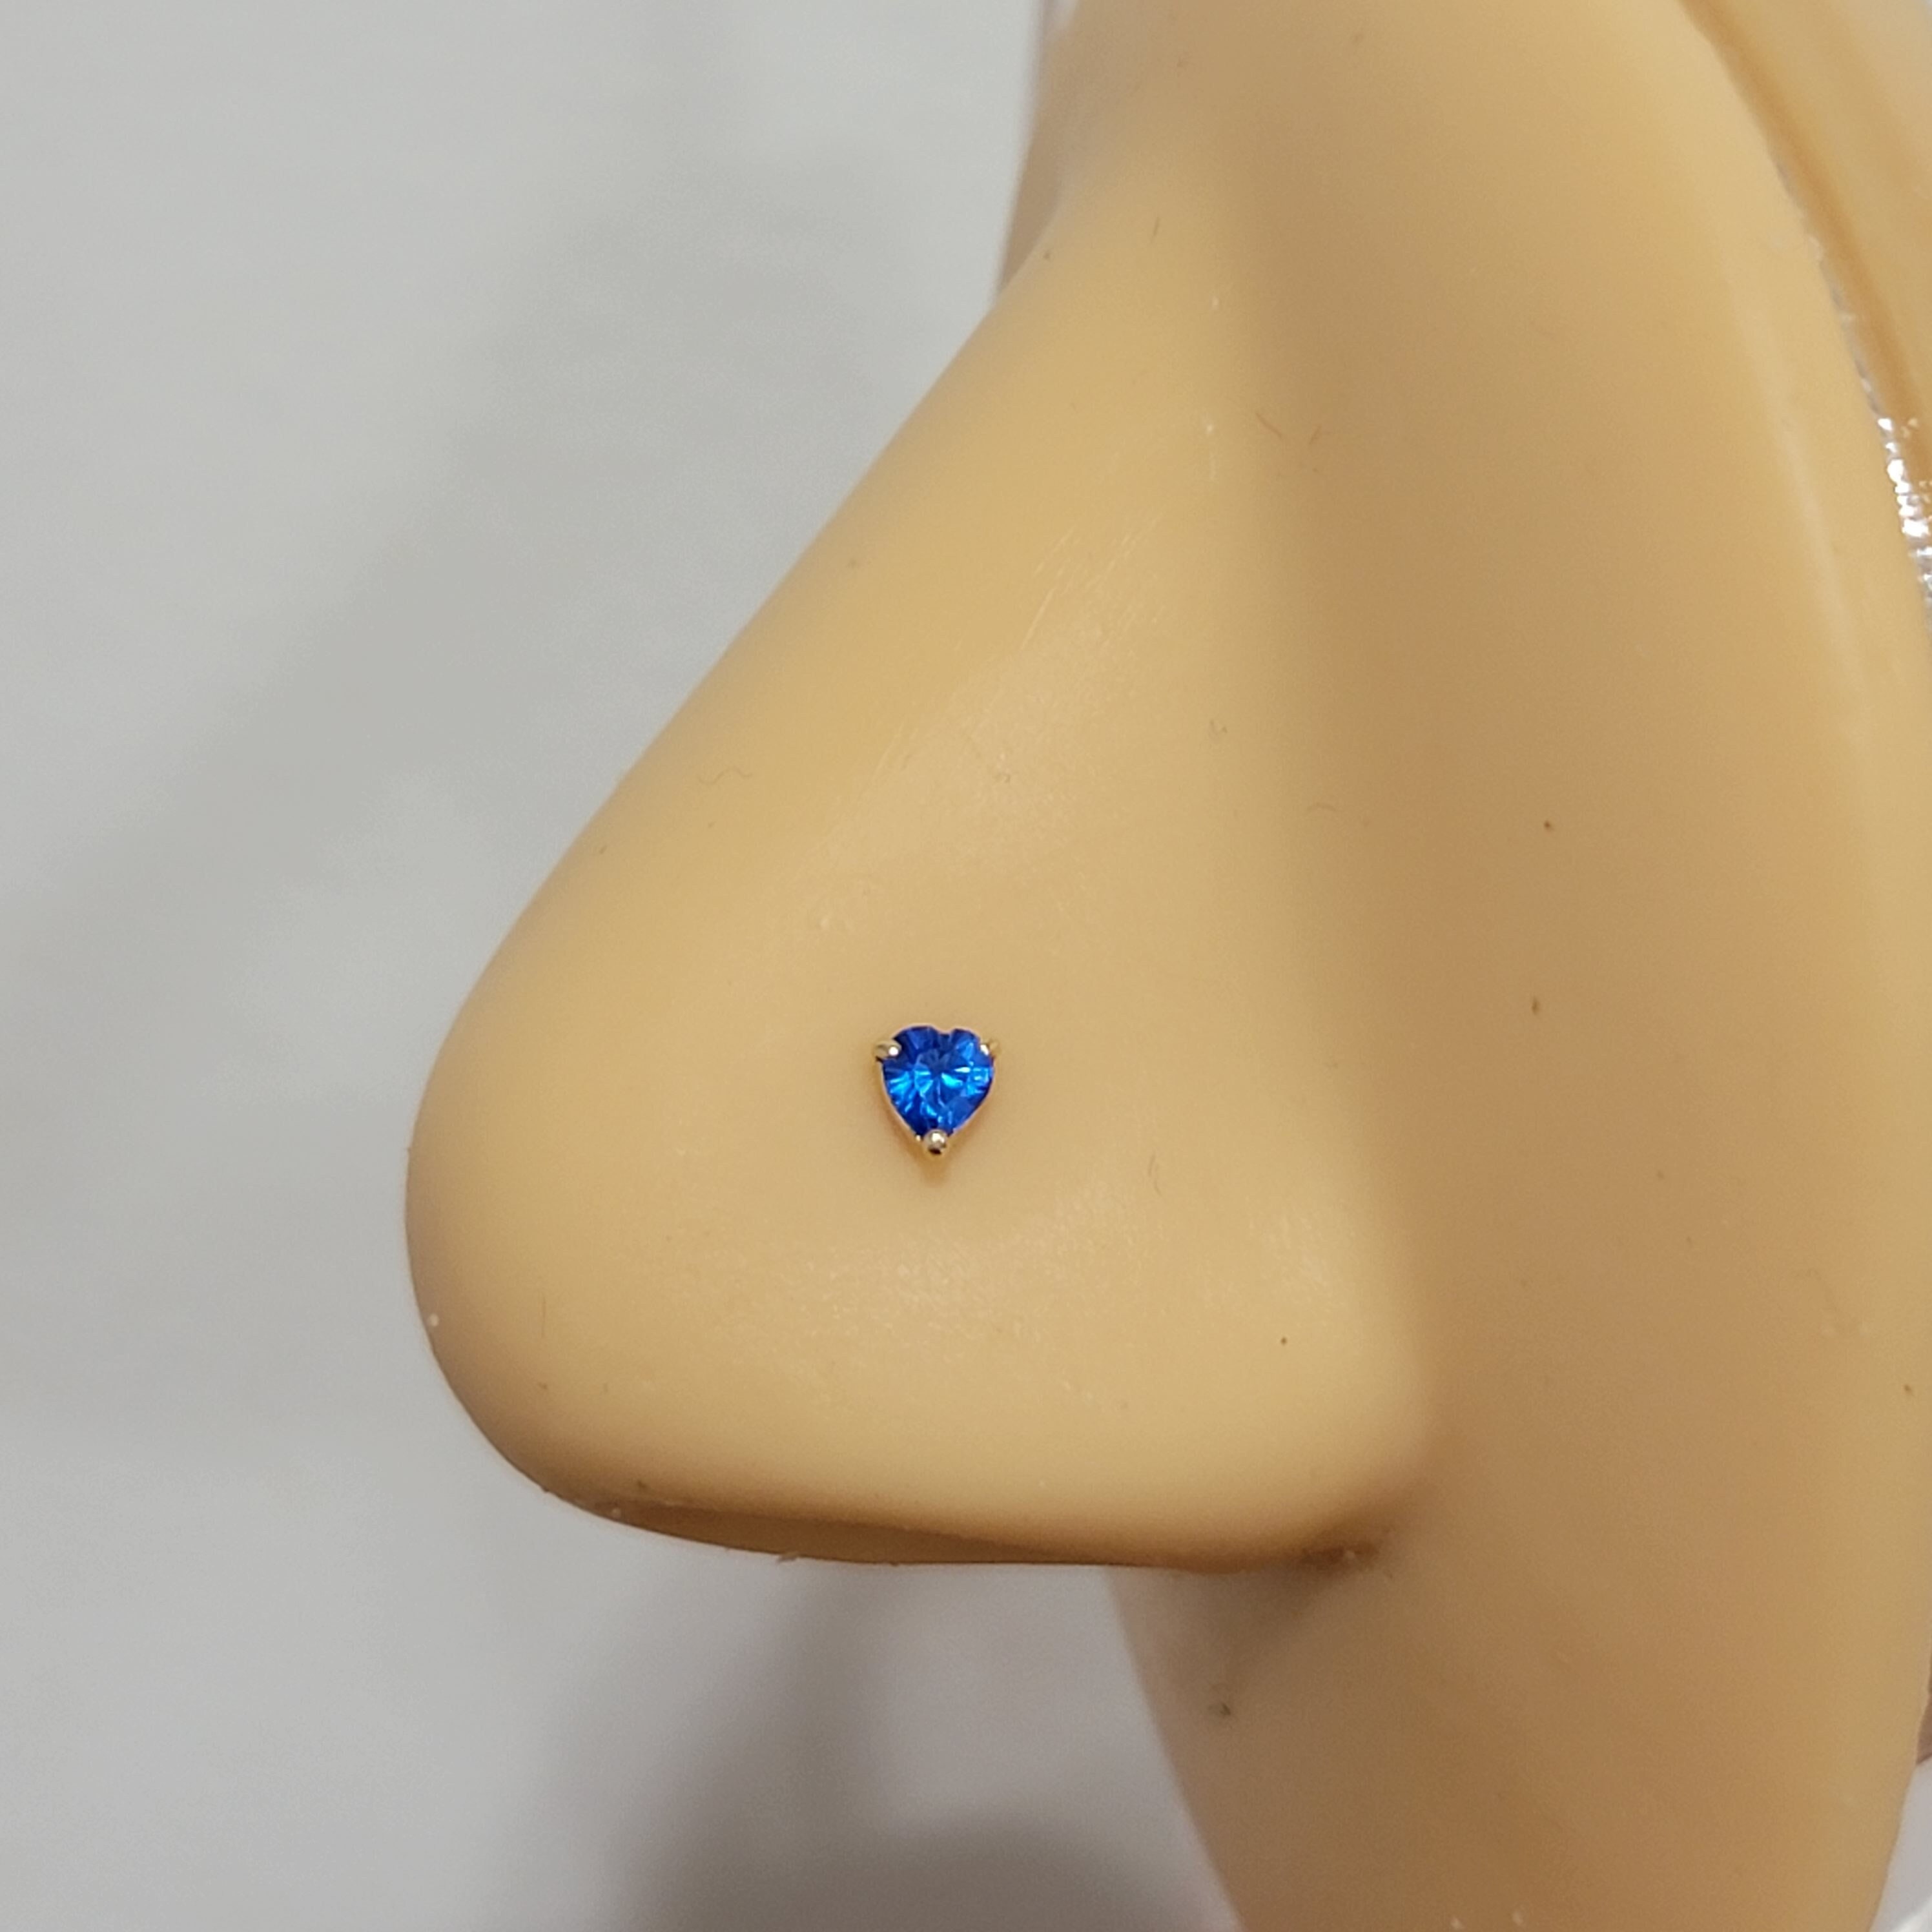 Indian Oxidized Nose Ring in Blue Stone - J.S Jewellery Store PK